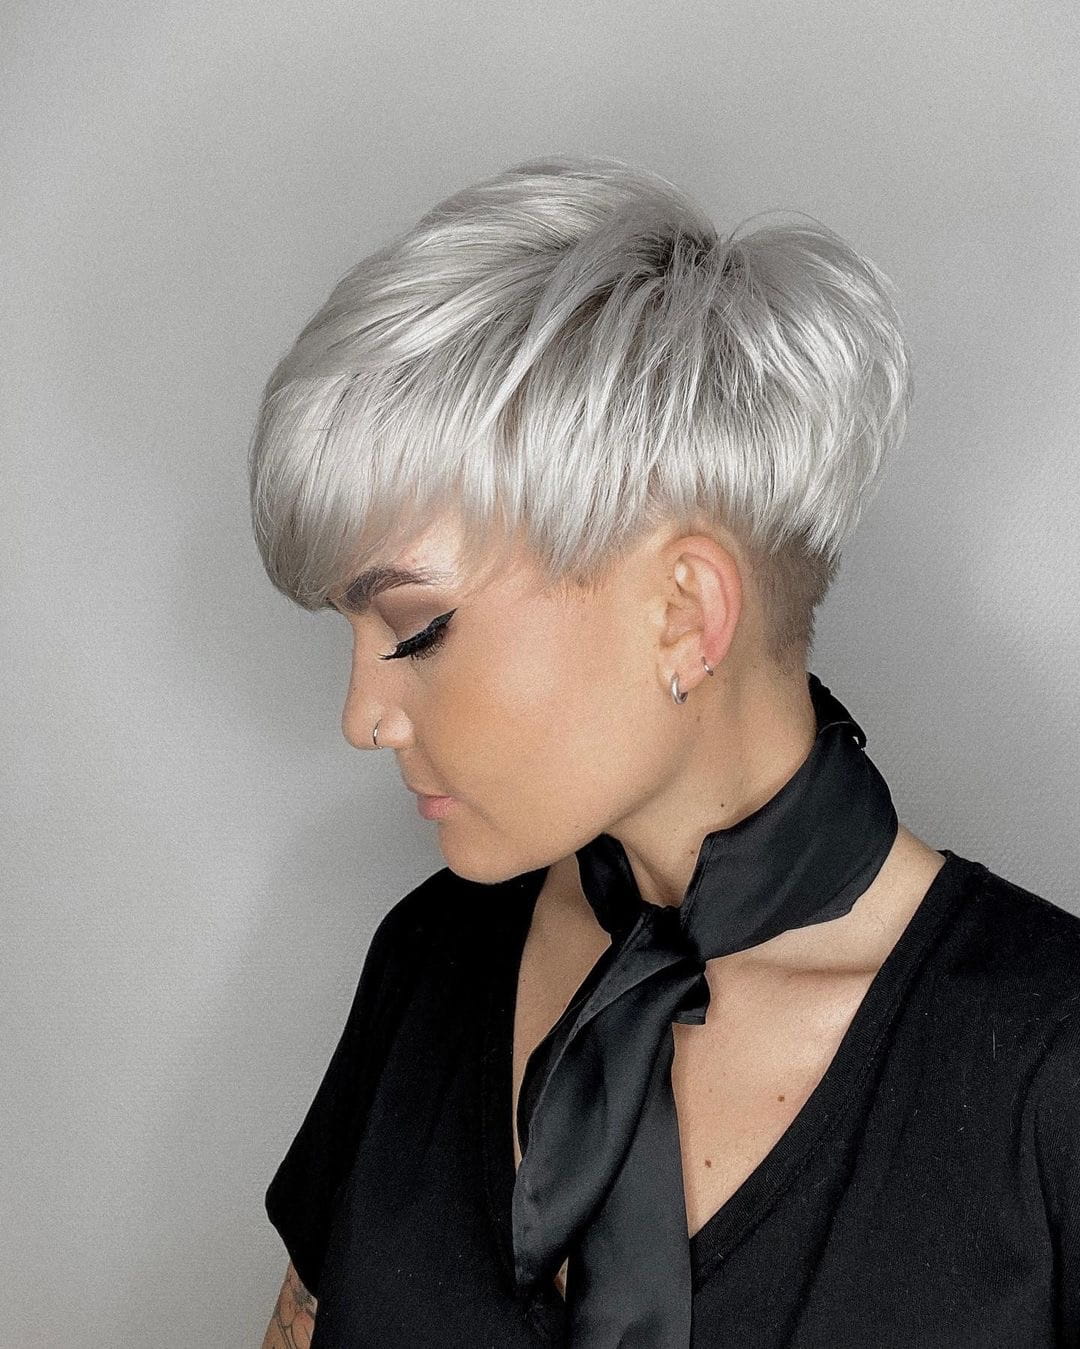 100+ Best Short Hairstyles & Haircuts For Women In 2023 images 110